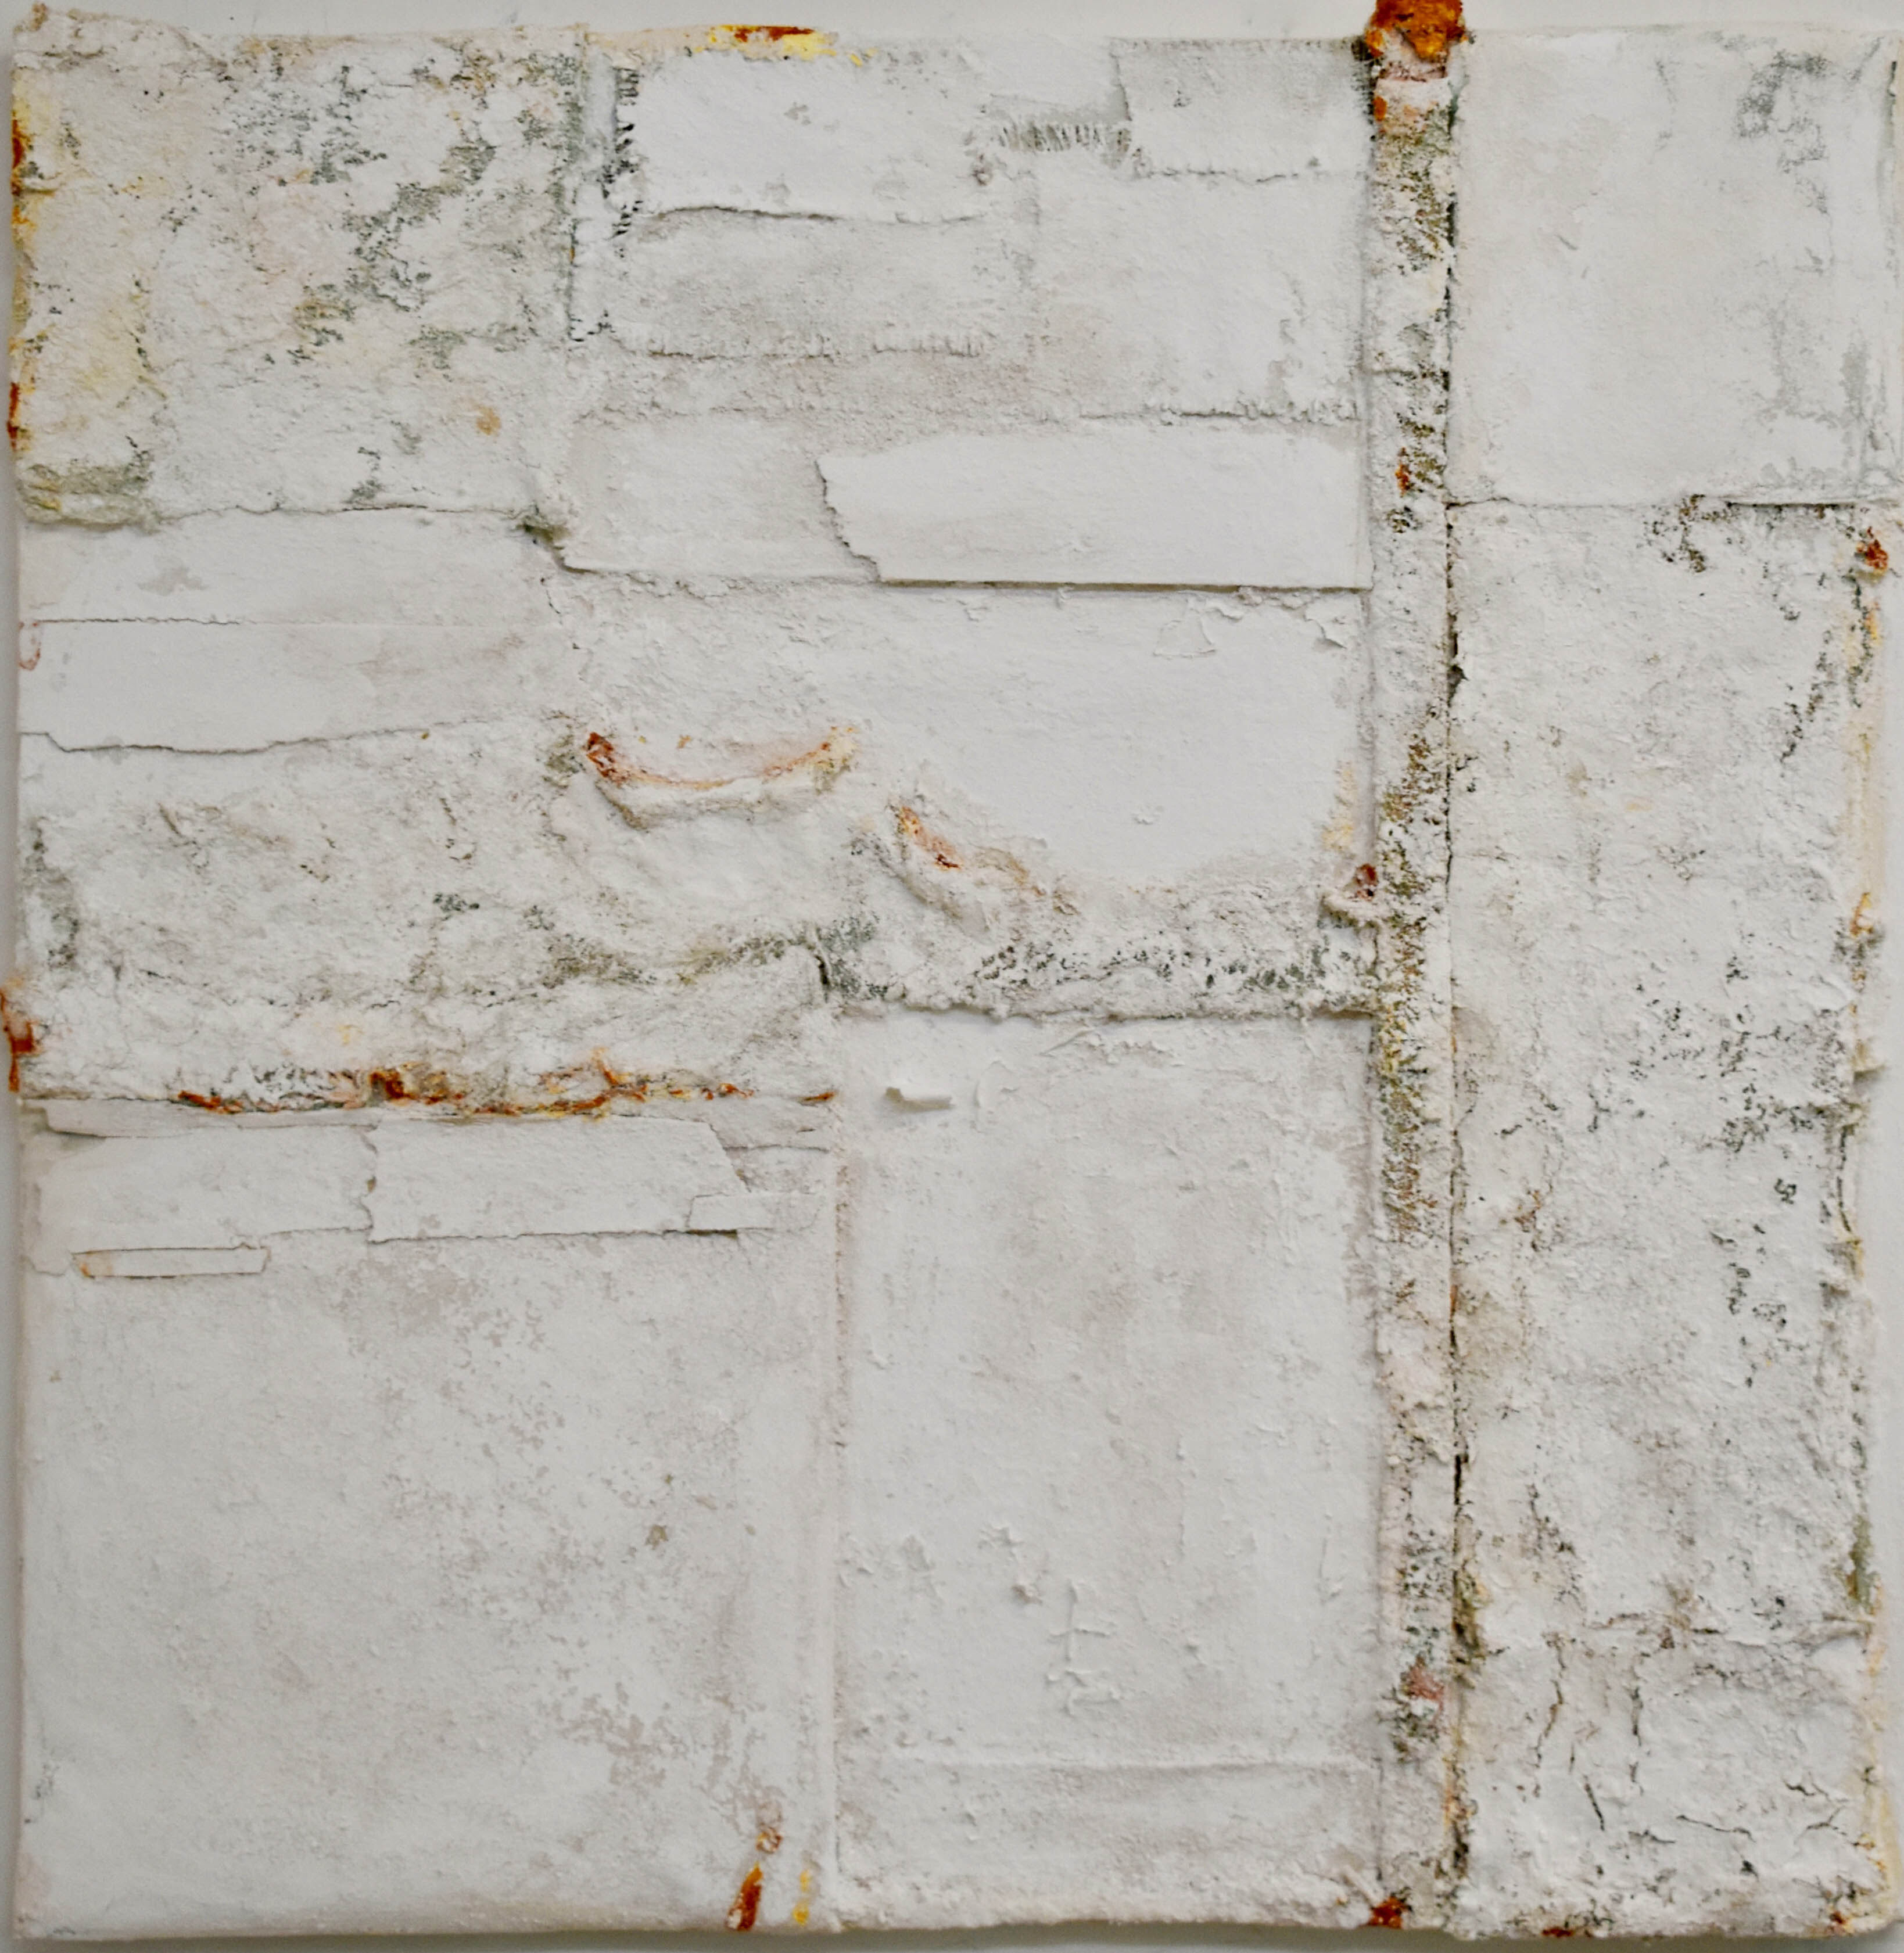 Anna Caione WHITE #7, 2019, Fabric, pigment _ mixed media on canvas, 100cmx100cm